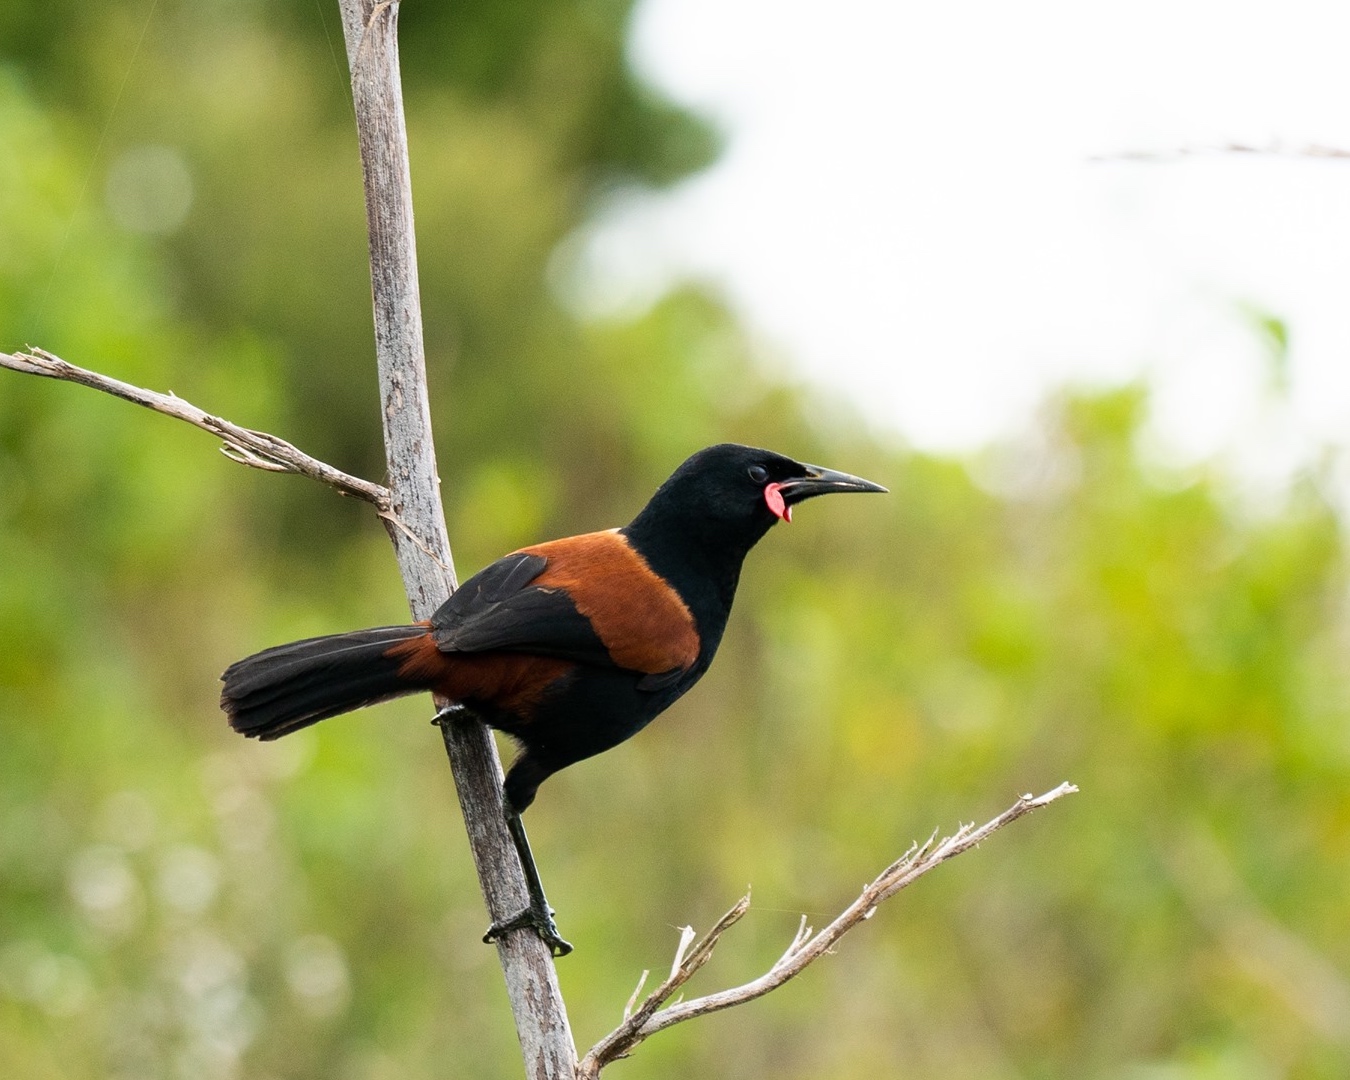 A black bird with an orange, saddle-shaped marking on its back, perched on a branch. 